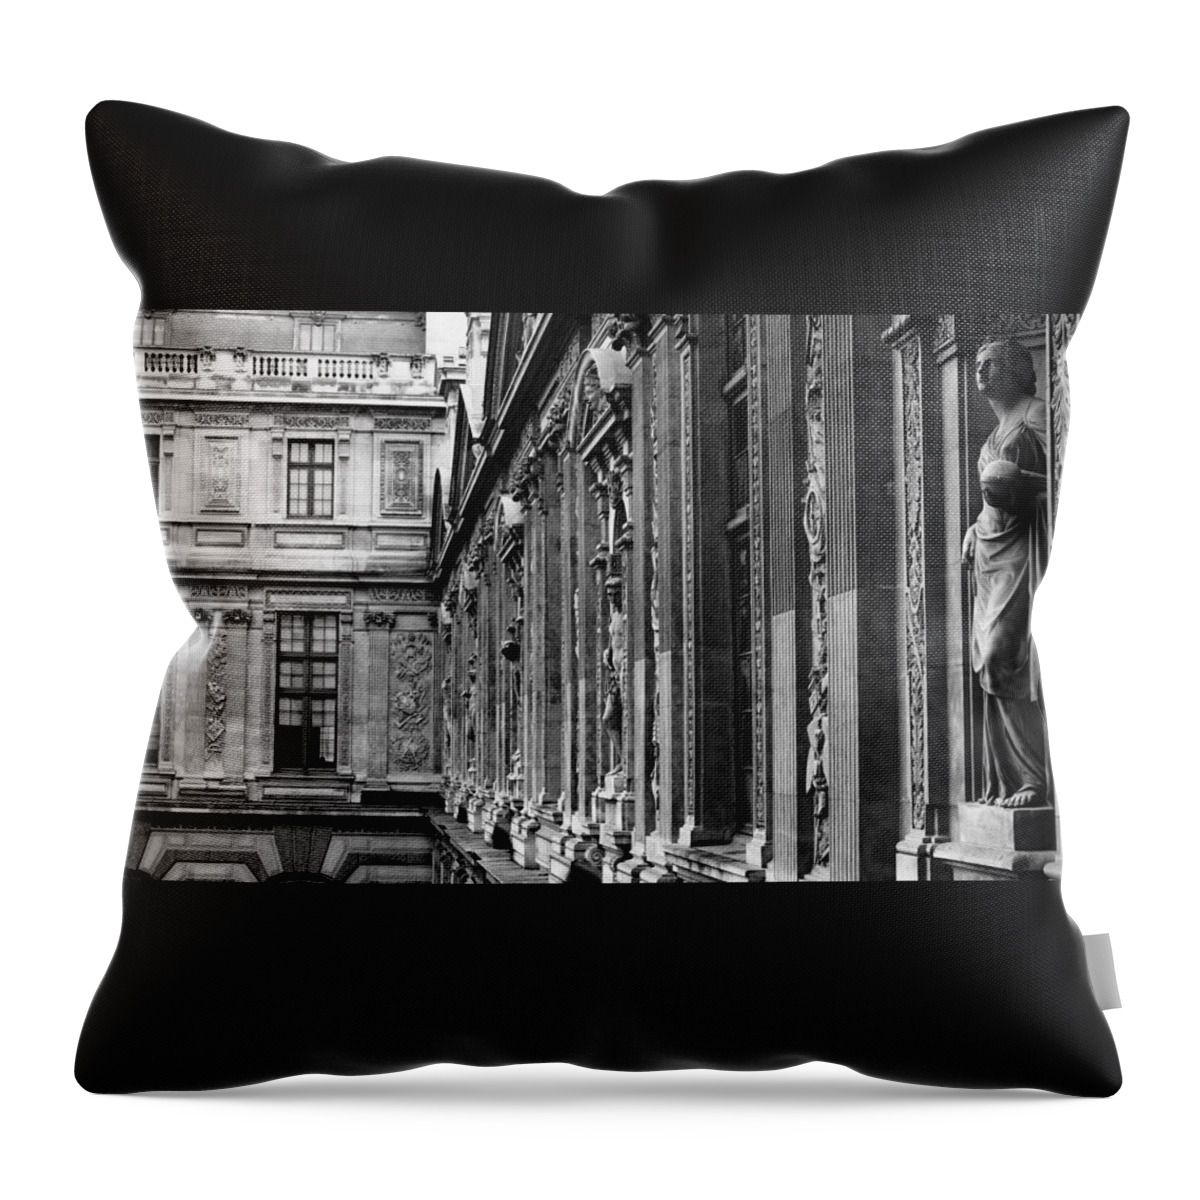 Europe Throw Pillow featuring the photograph Louvre Statues Paris France by Lawrence S Richardson Jr